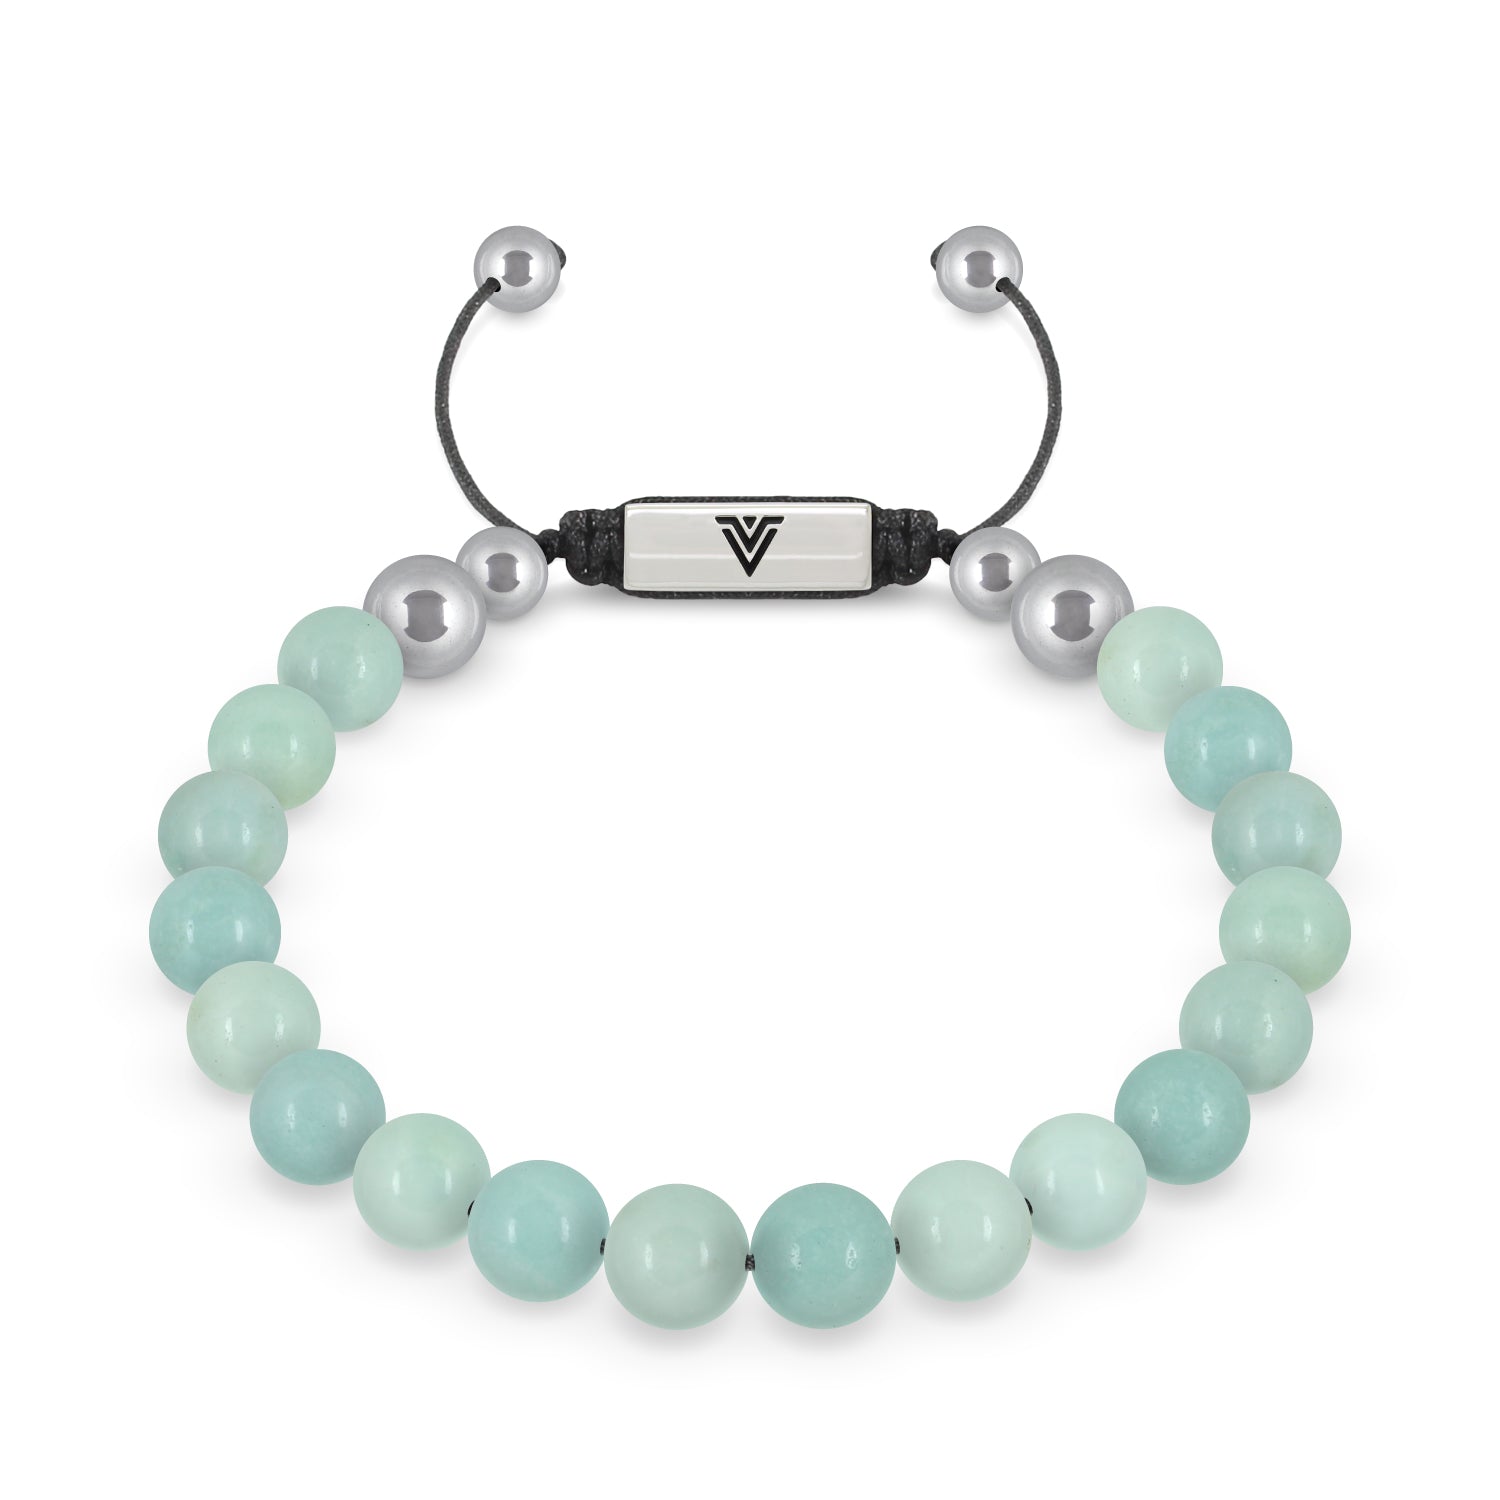 Front view of an 8mm Smooth Amazonite beaded shamballa bracelet with silver stainless steel logo bead made by Voltlin